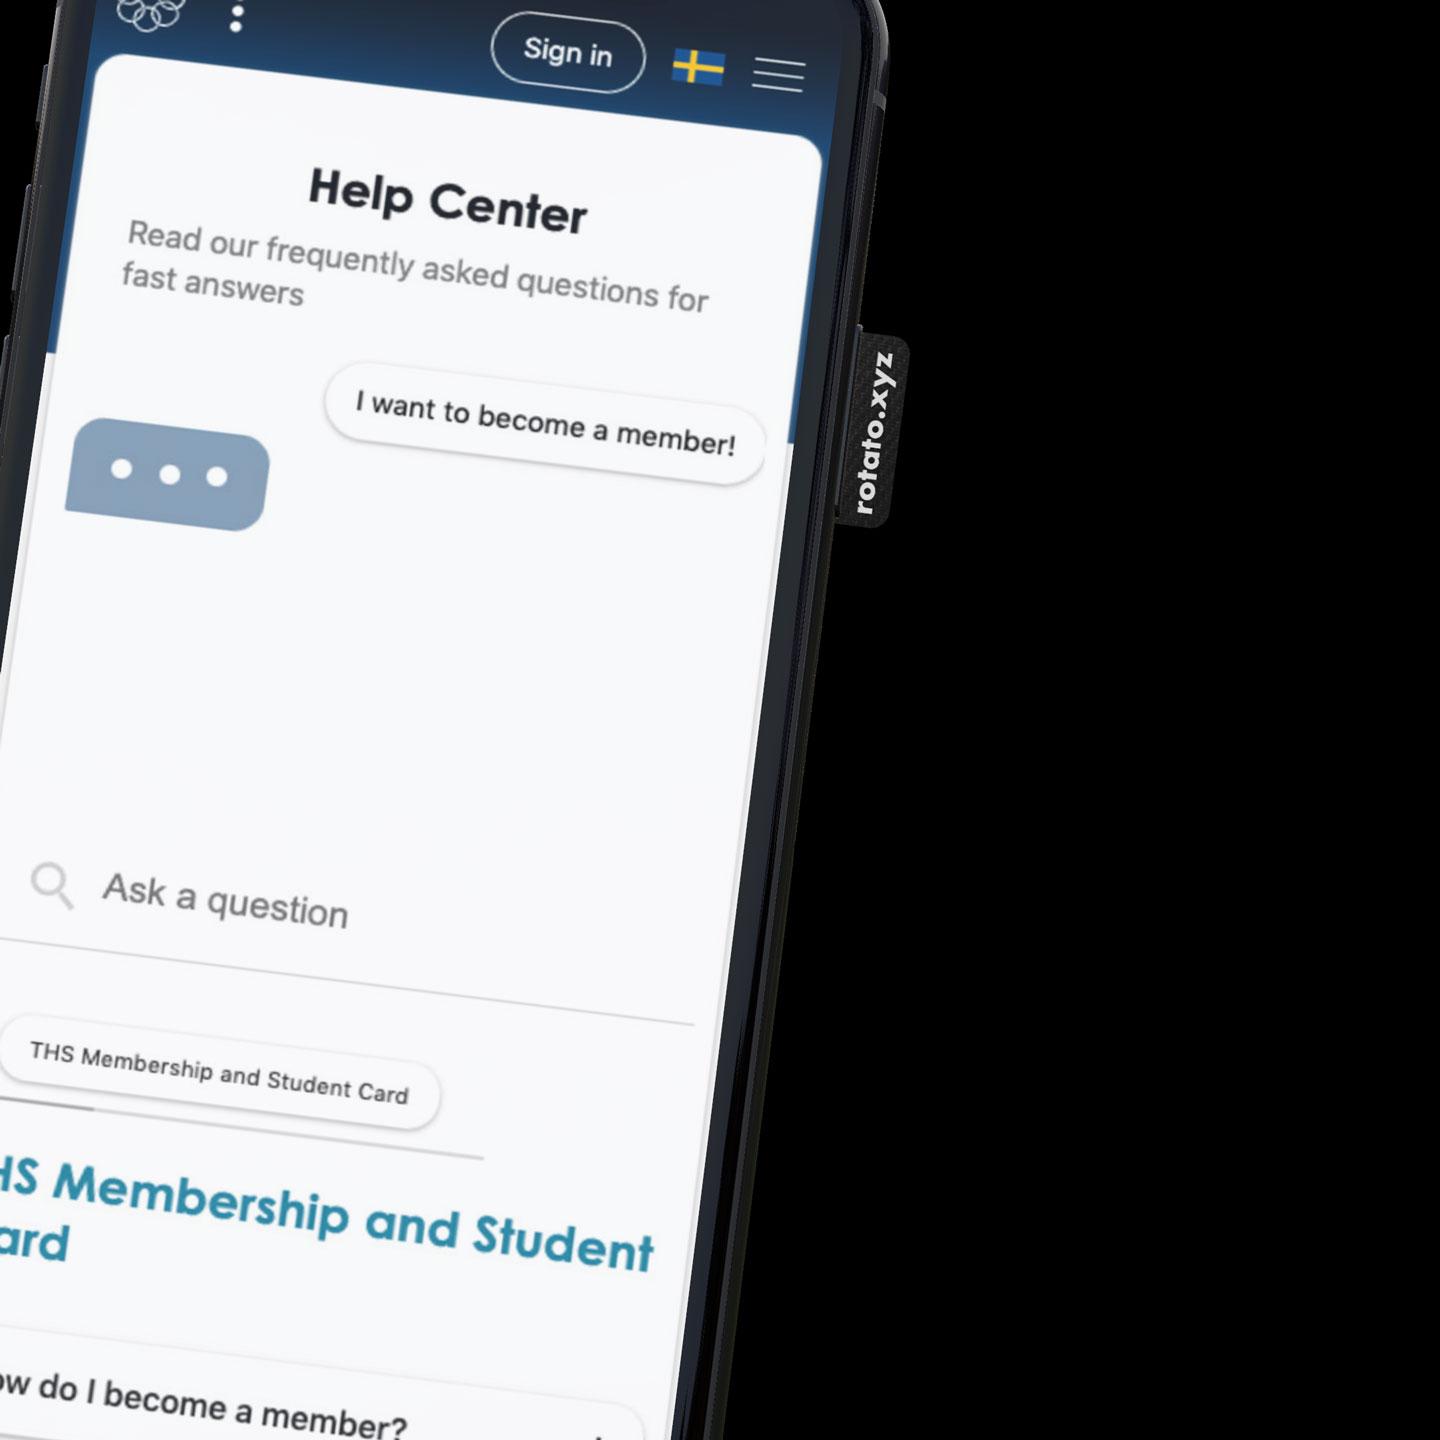 Smartphone displaying THS help center page with options for frequently asked questions and customer support.